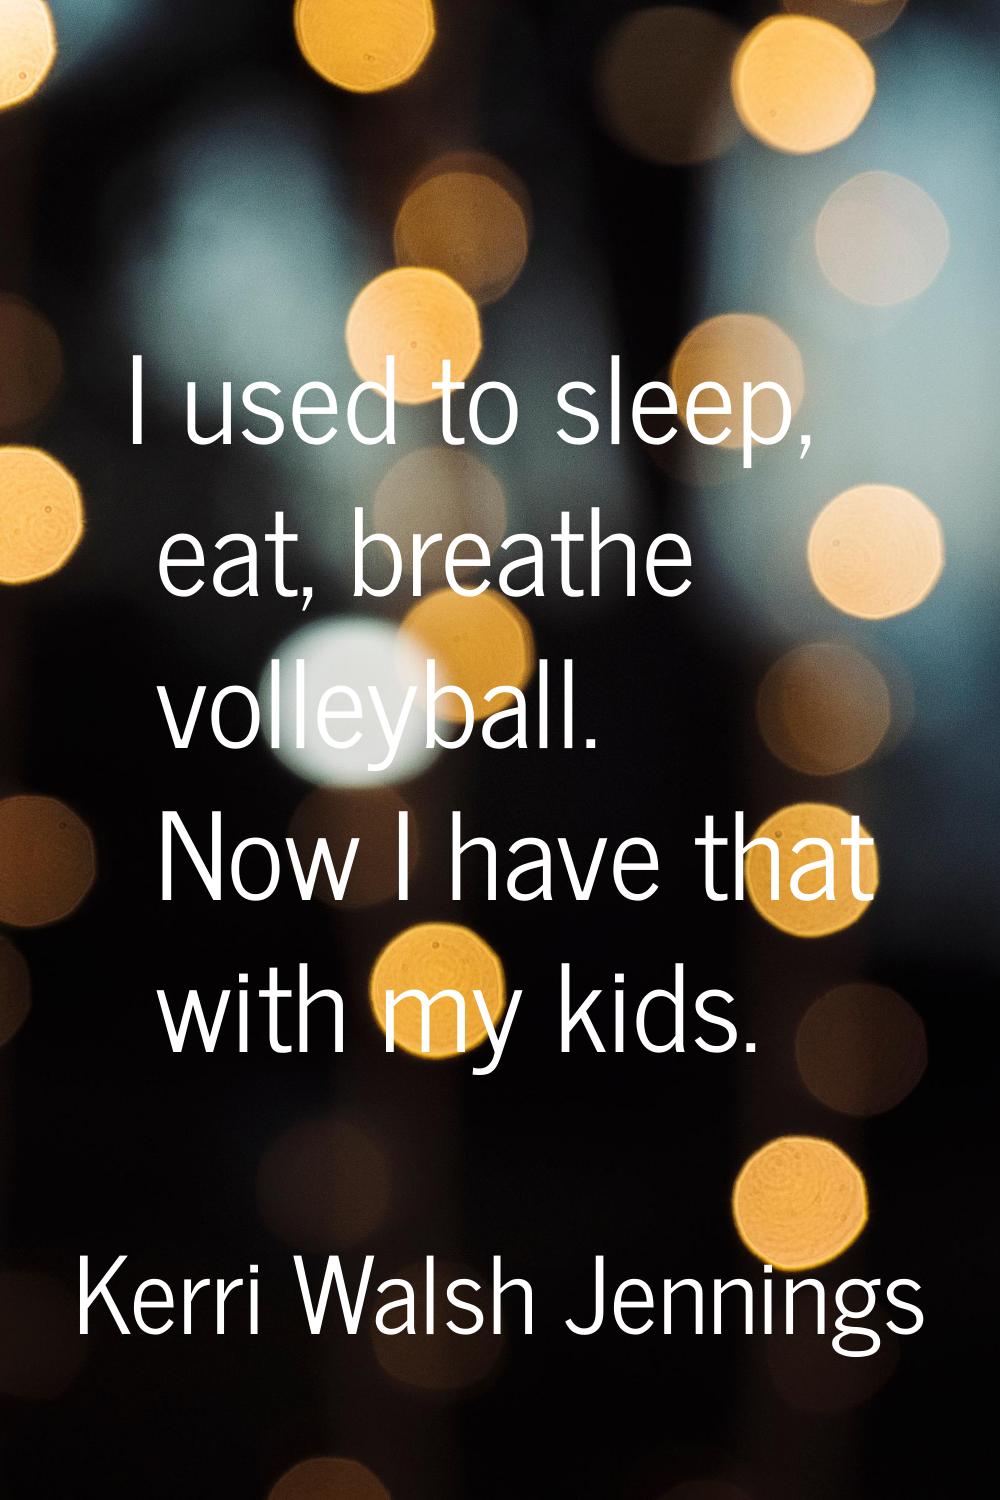 I used to sleep, eat, breathe volleyball. Now I have that with my kids.